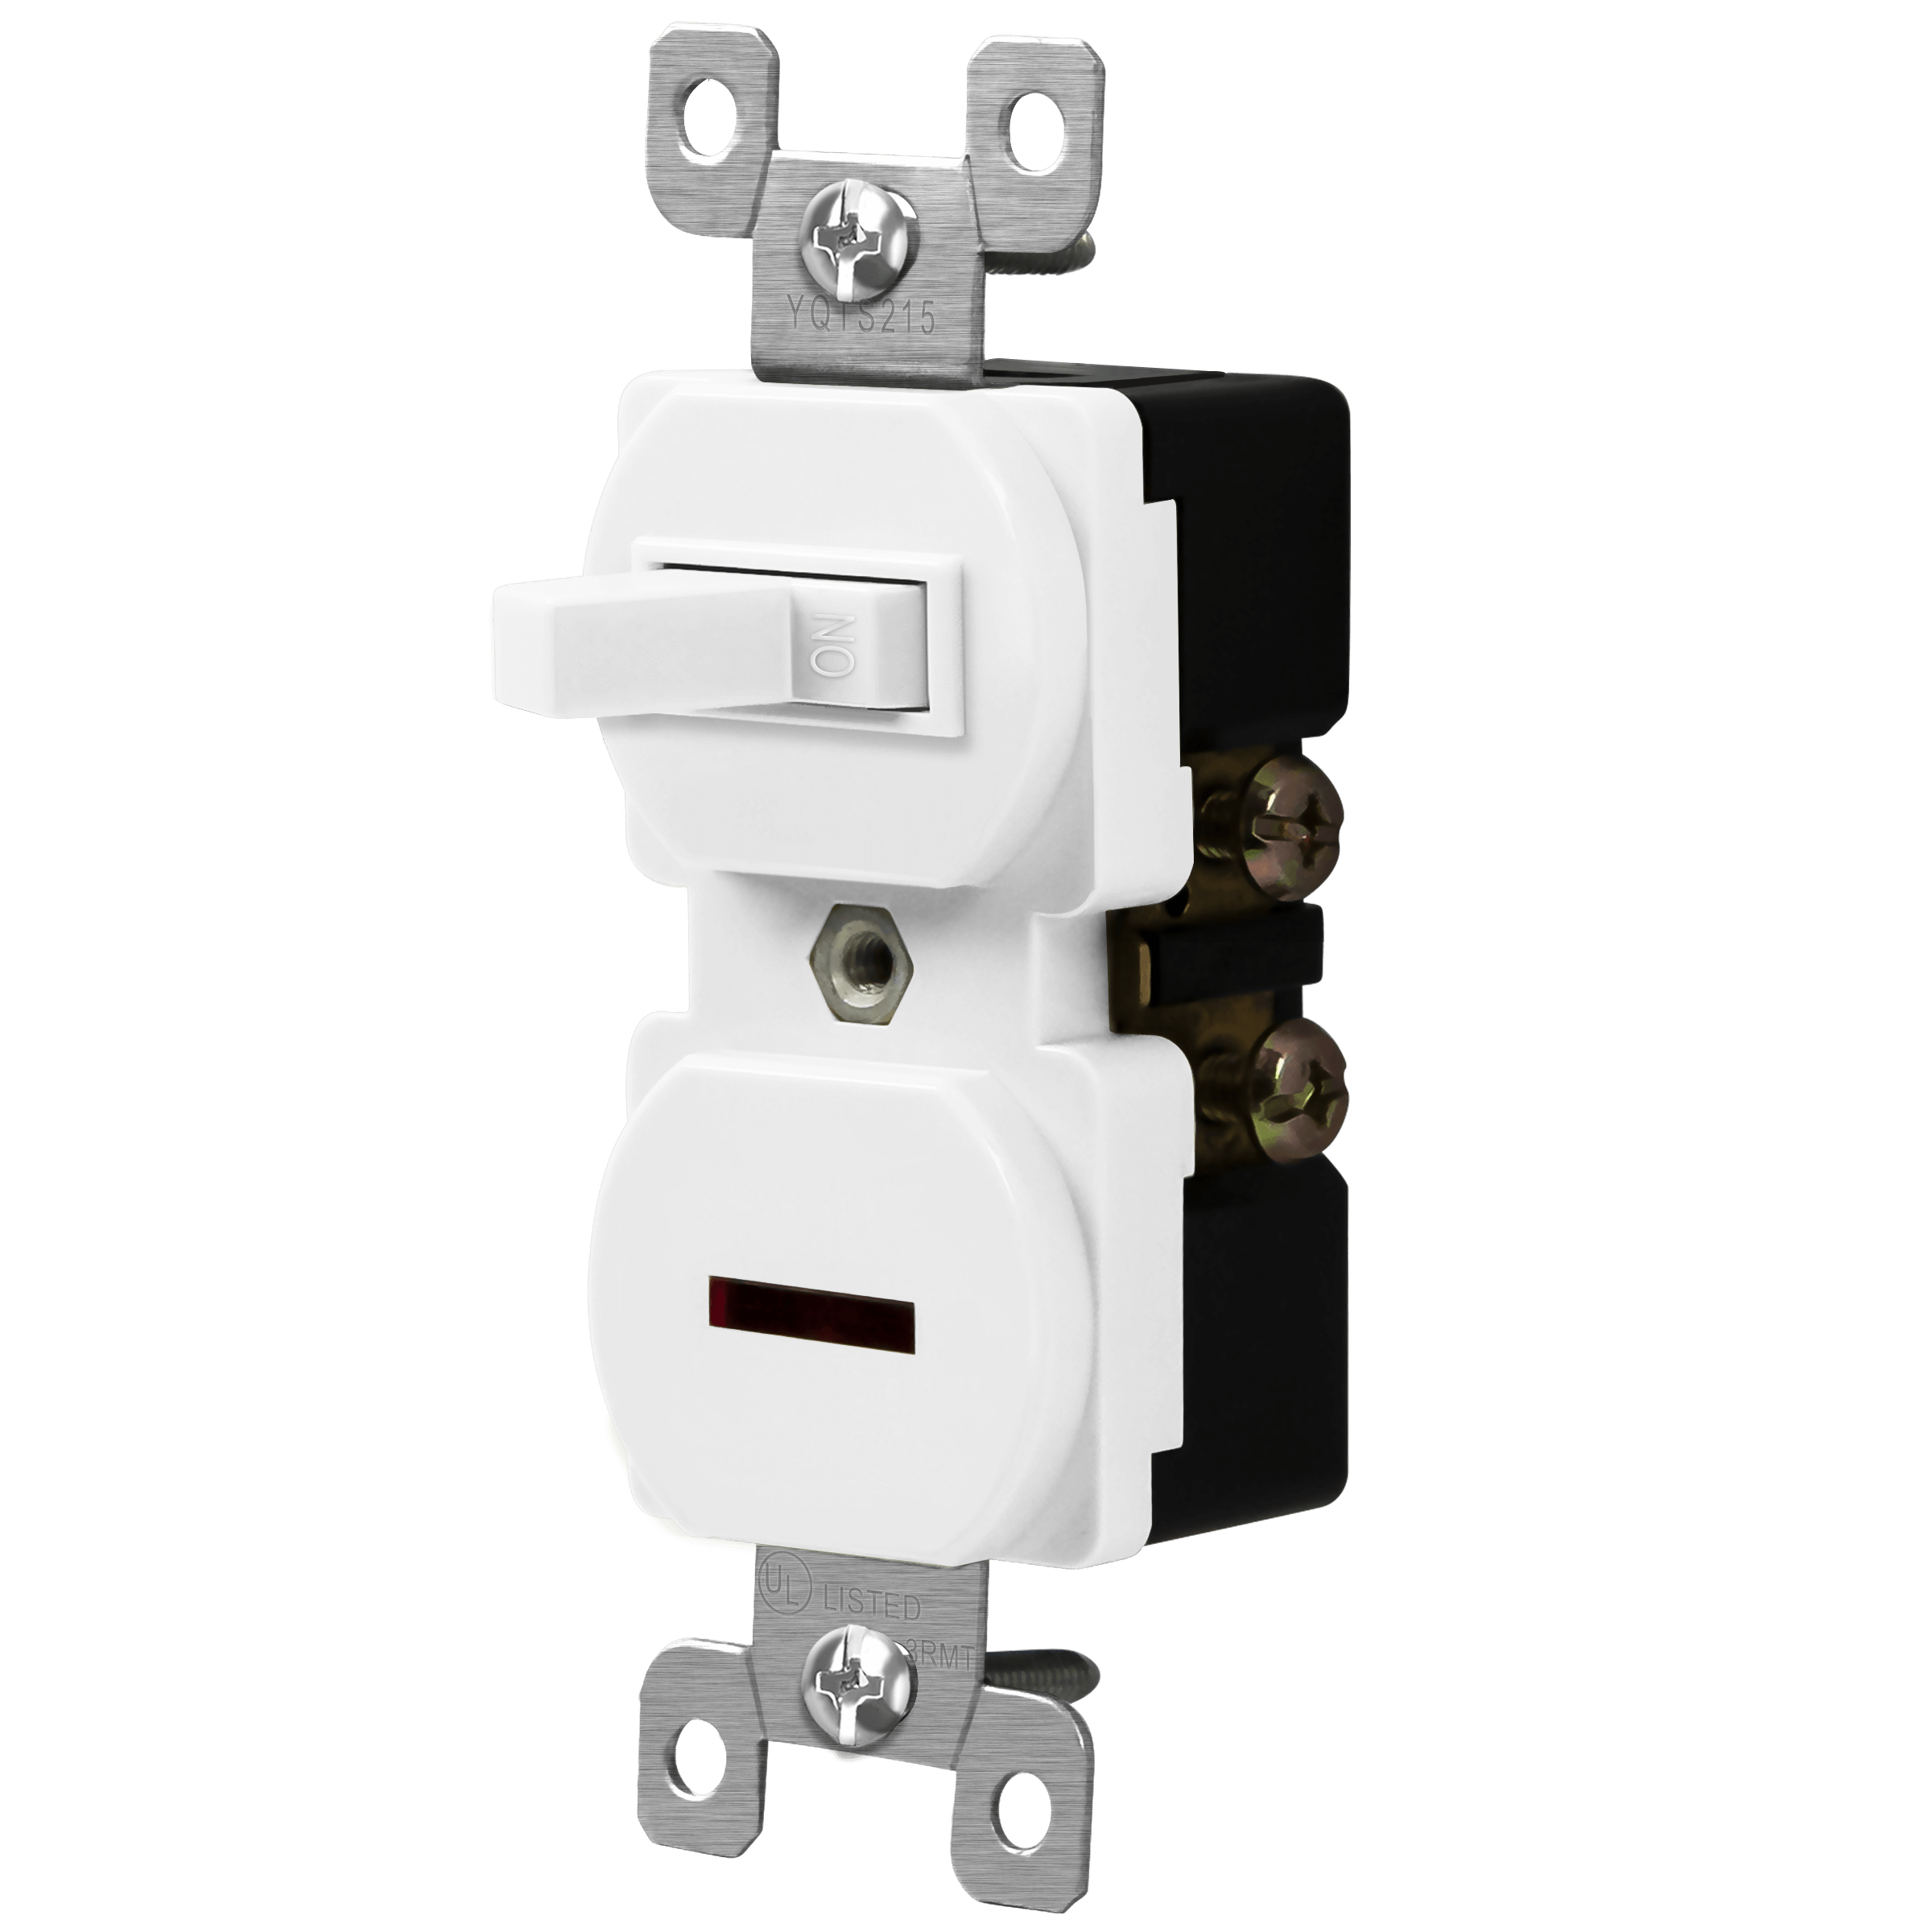 Combination Toggle and Pilot Light Switch Duplex Style